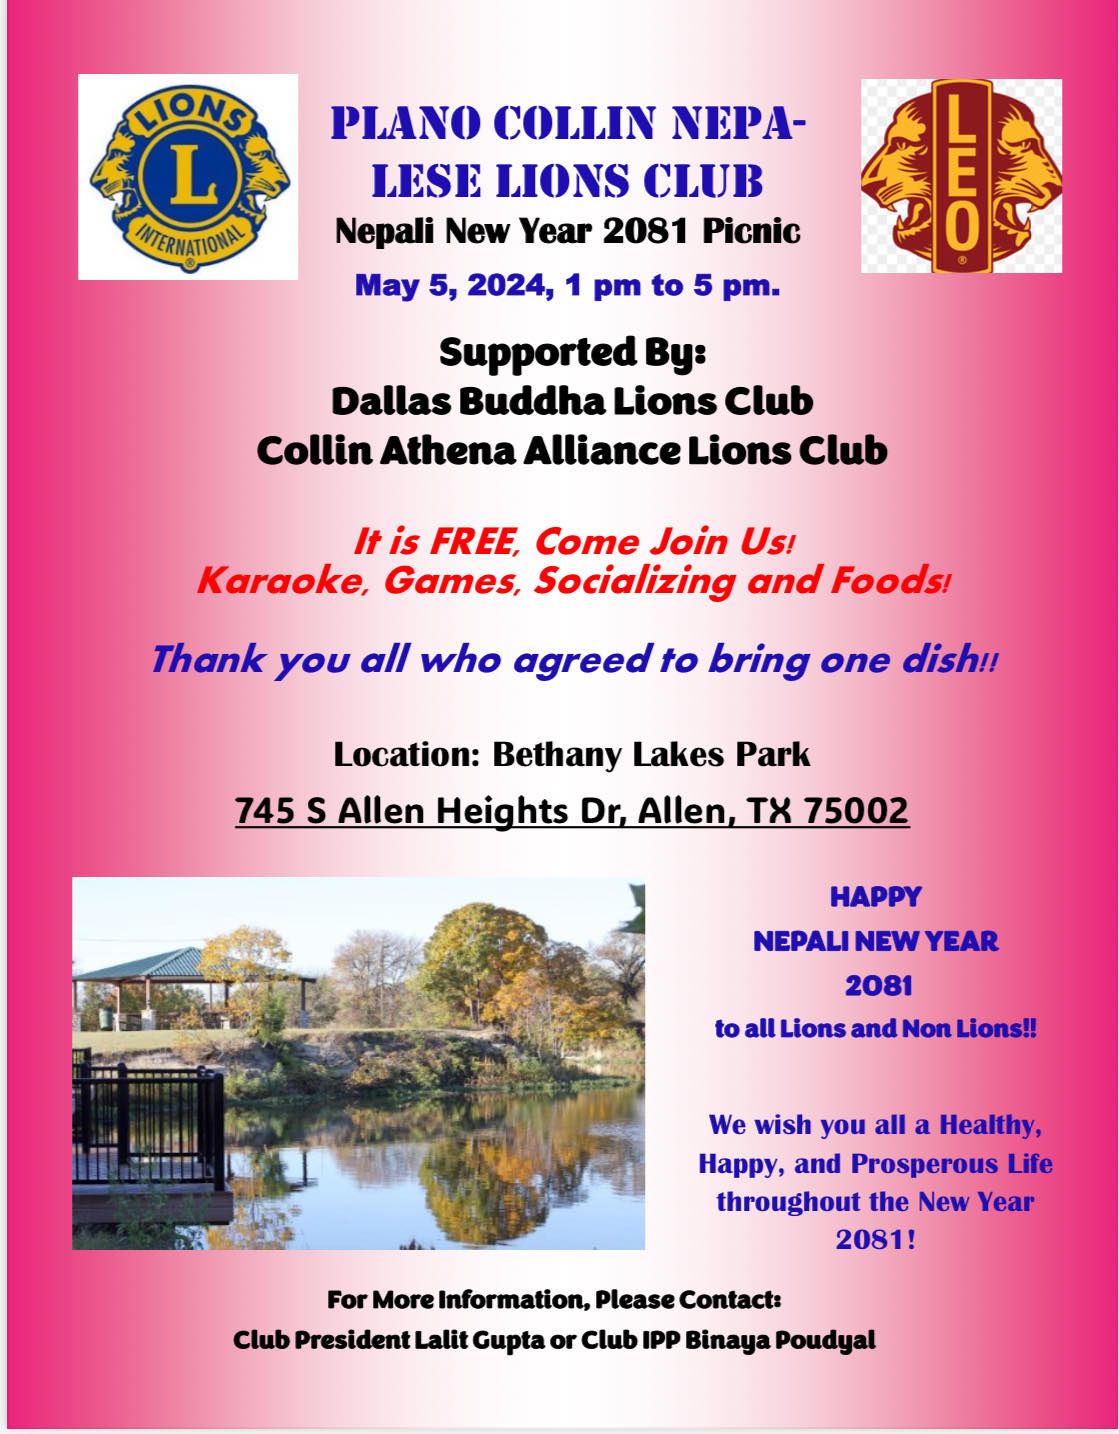 Nepali New Year Lions Club Fun and Fellowship Picnic Event